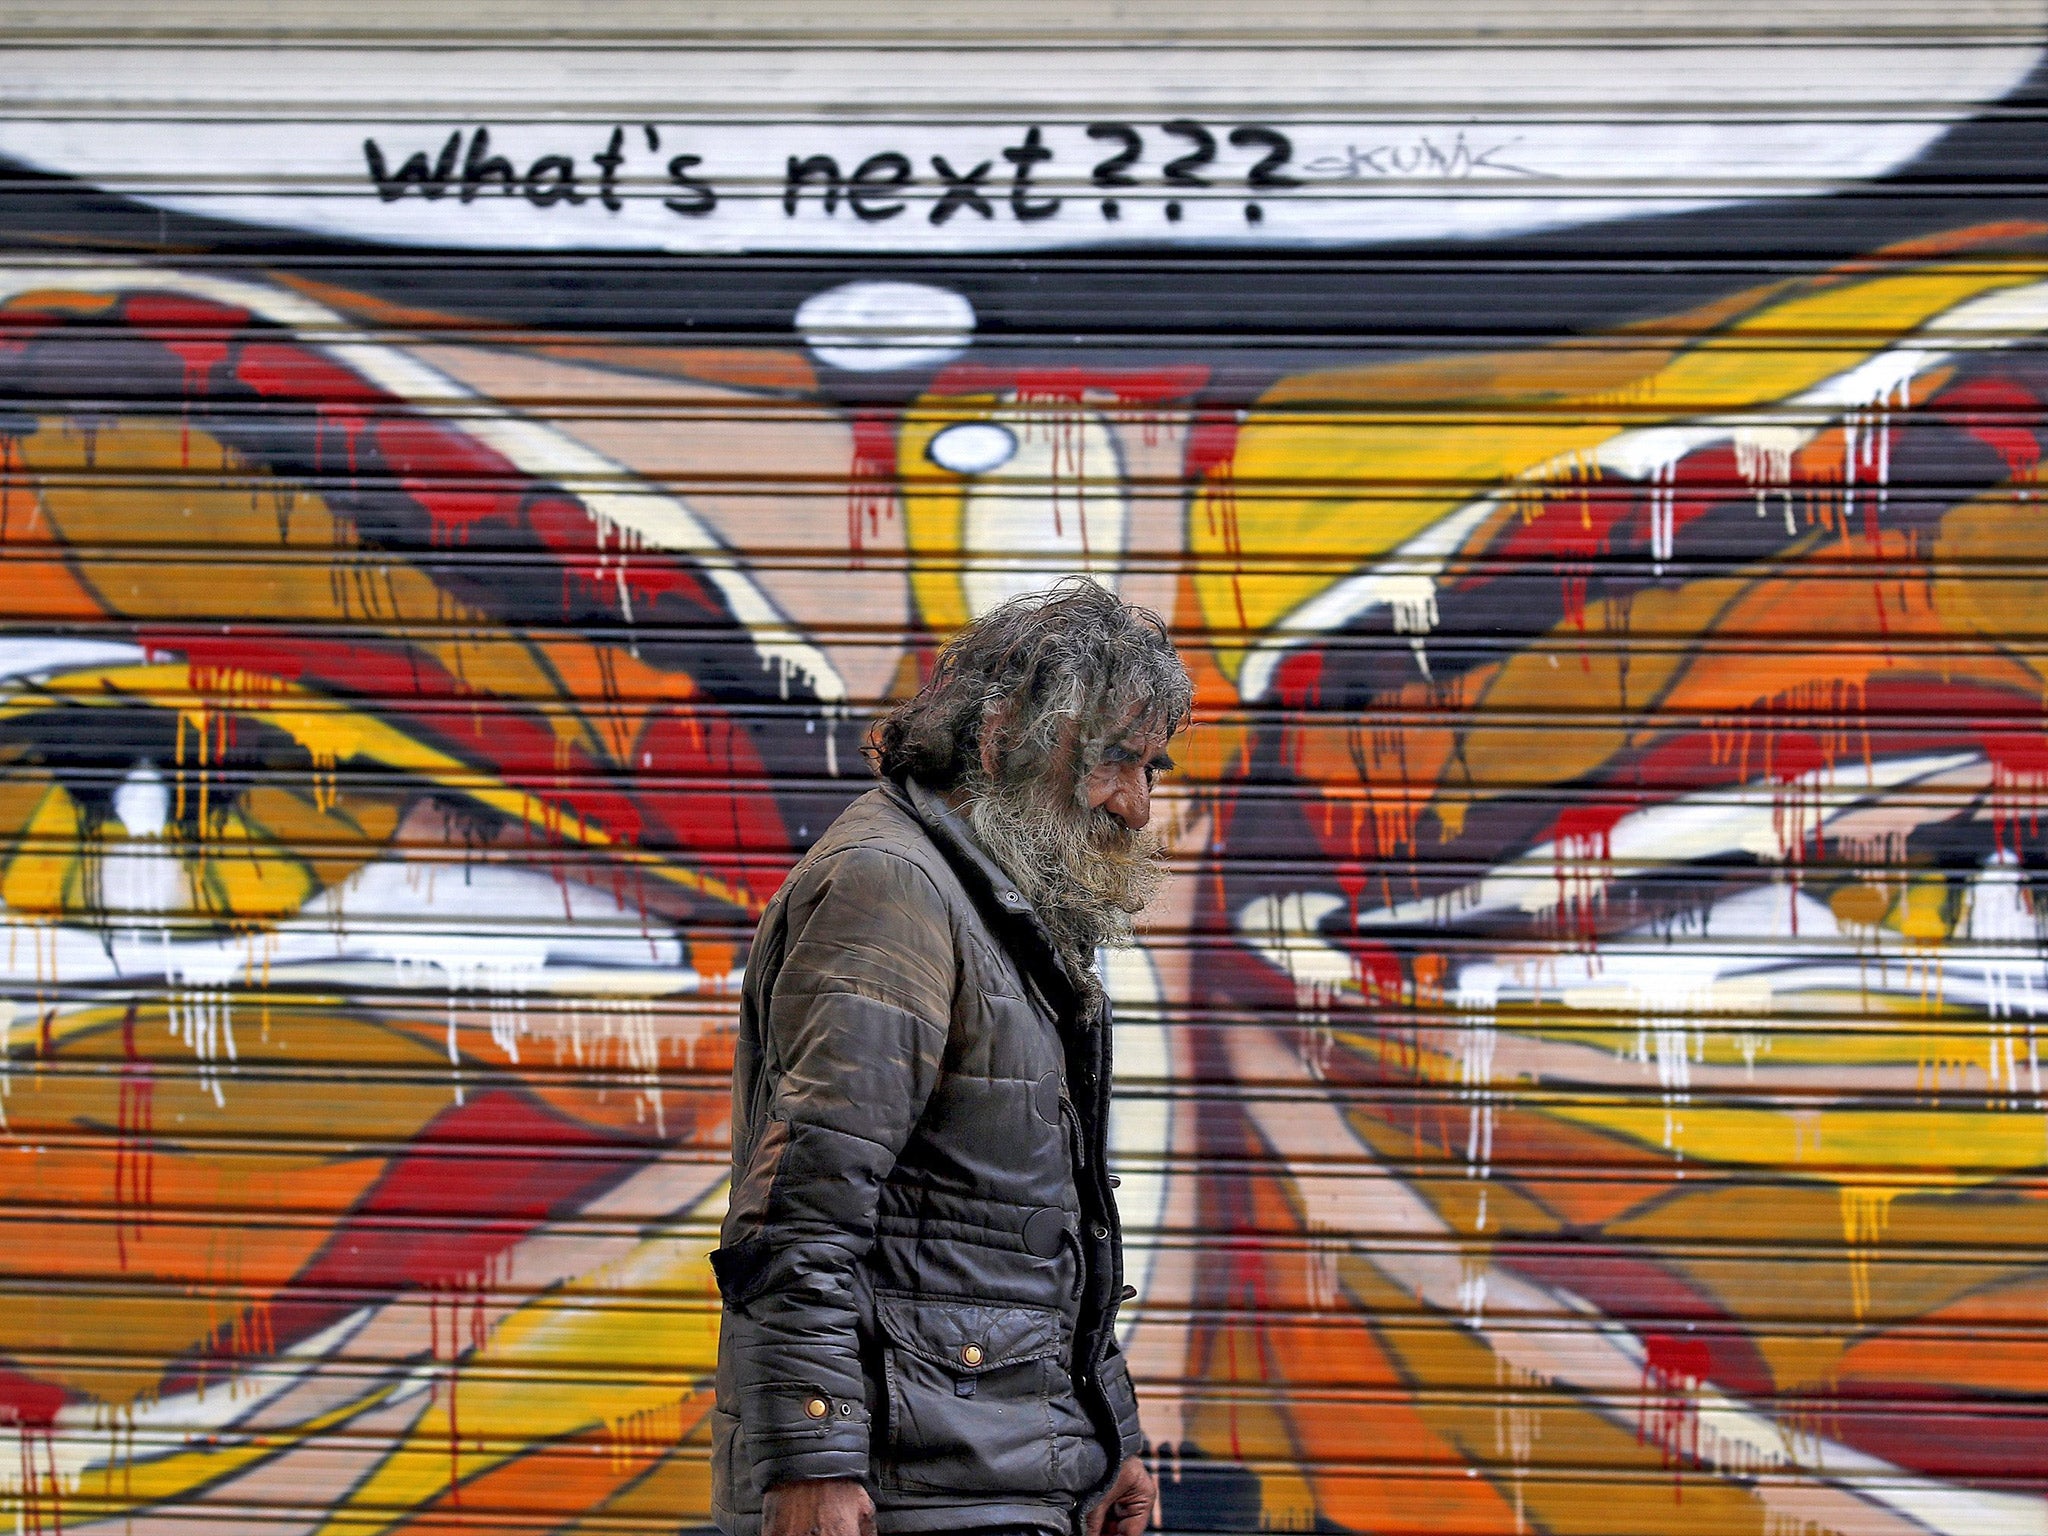 A man walks by a mural in Athens on Tuesday